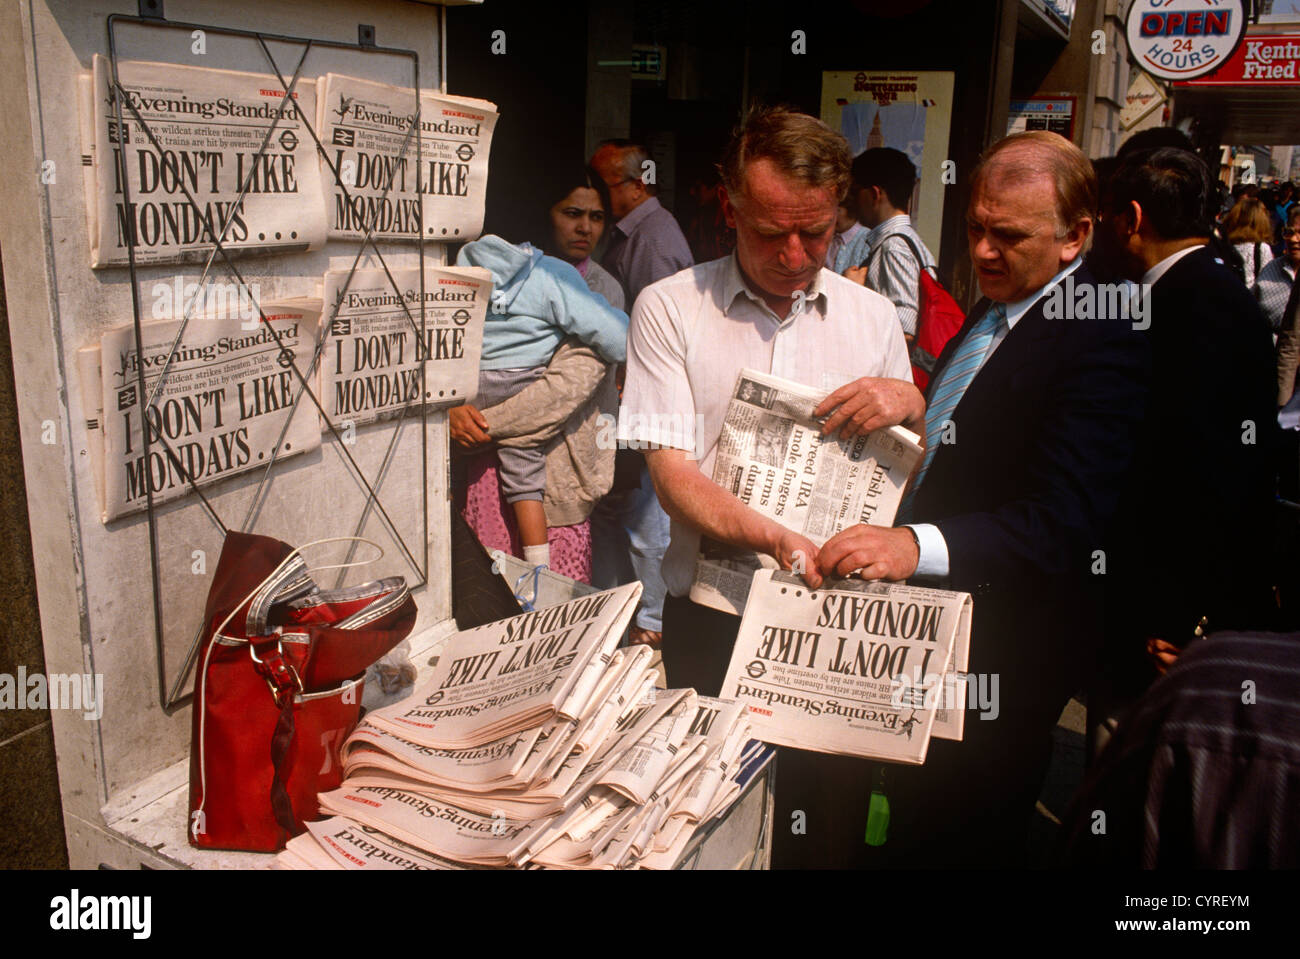 A Newspaper seller displays copies of the London tabloid aimed at commuters The Evening Standard Stock Photo